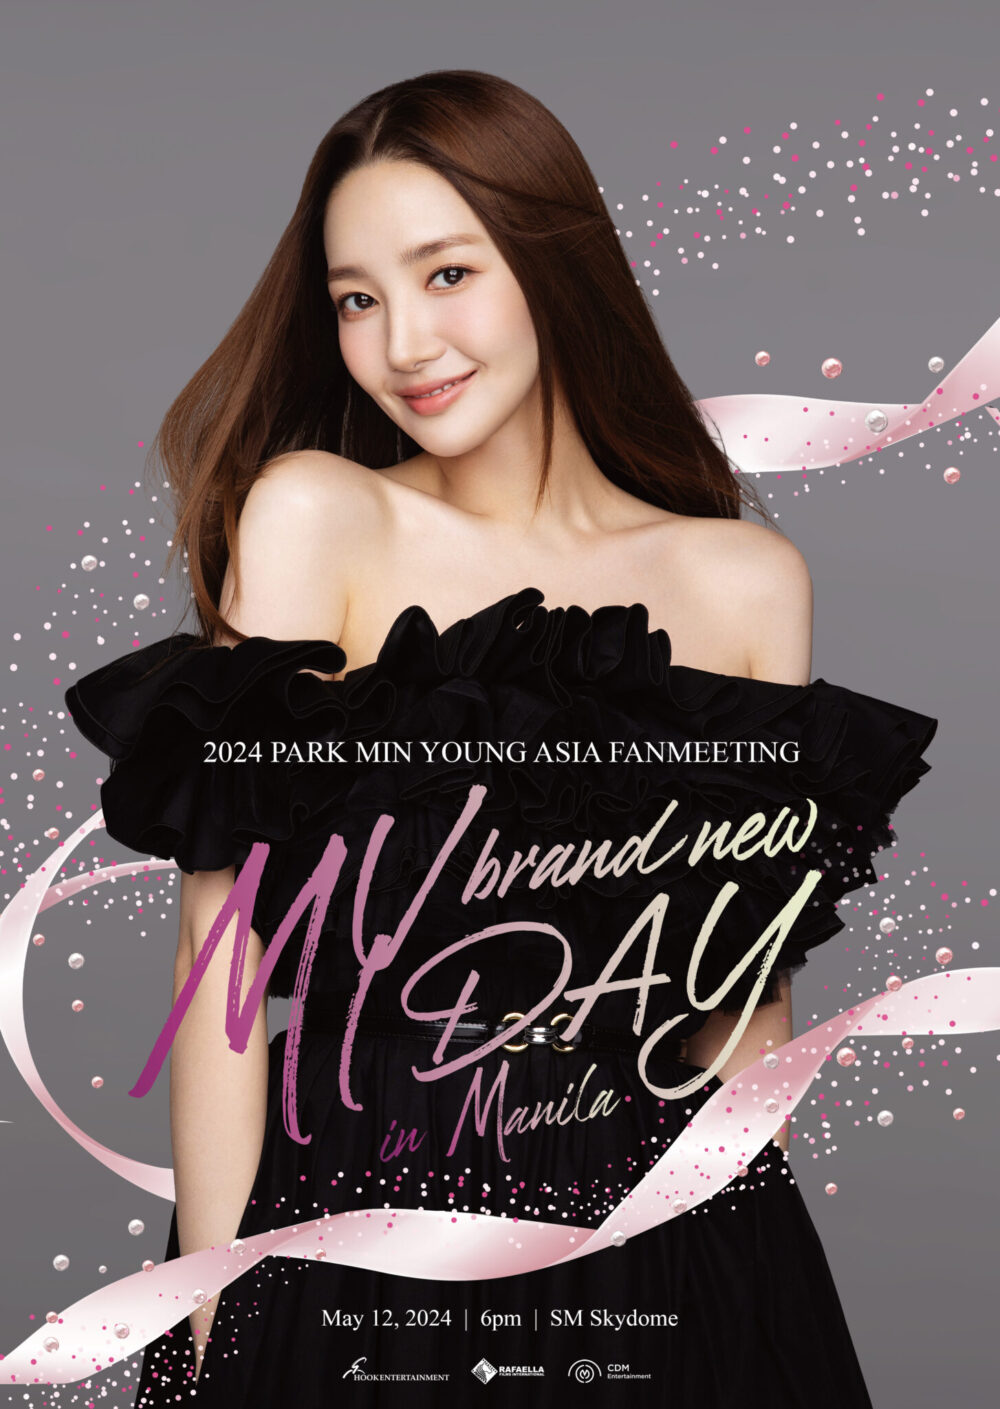 Park Min Young Expresses Excitement for 1st Manila Fan Meeting